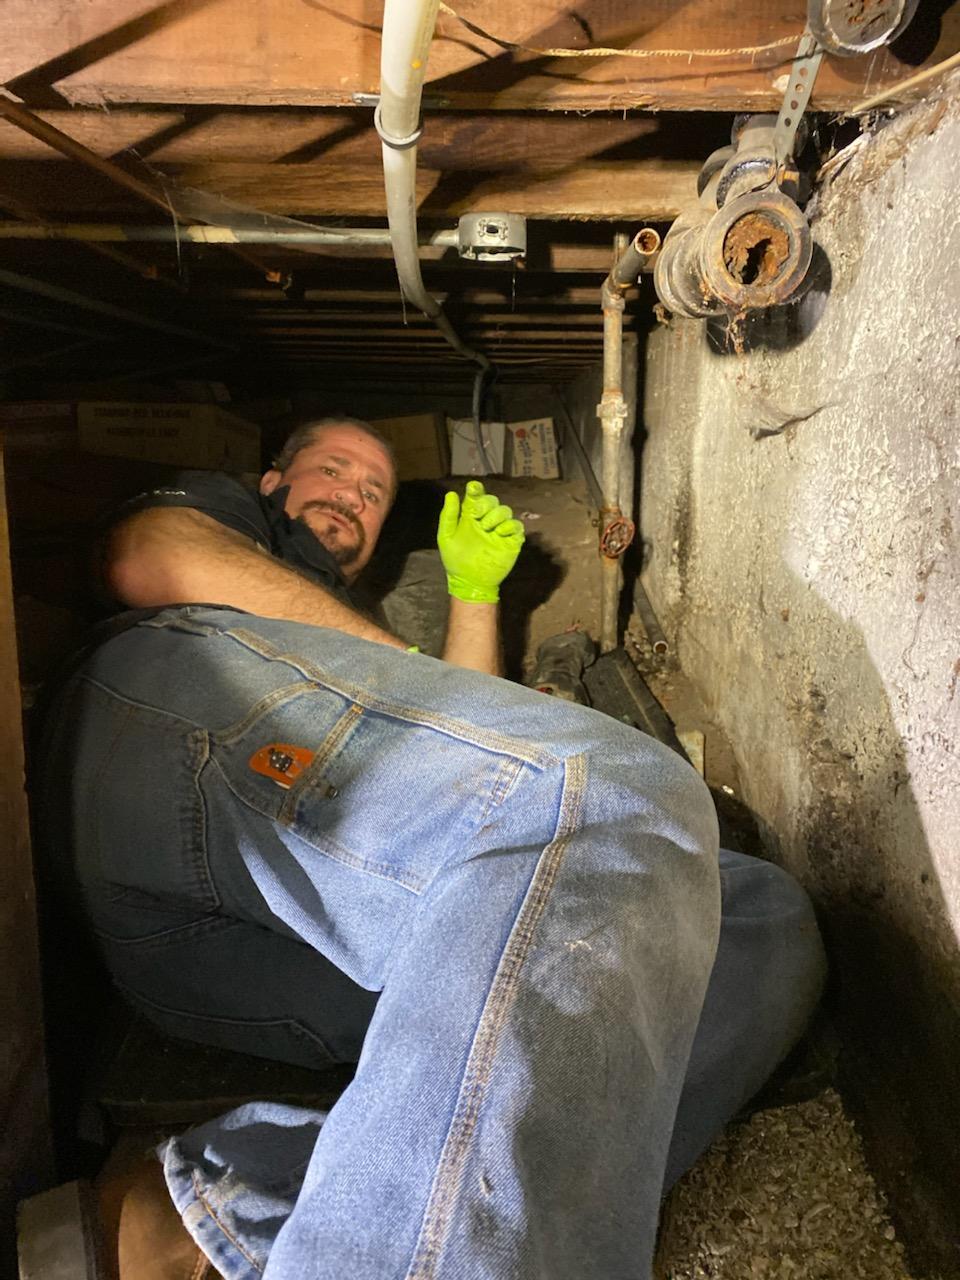 Plumber working in small space